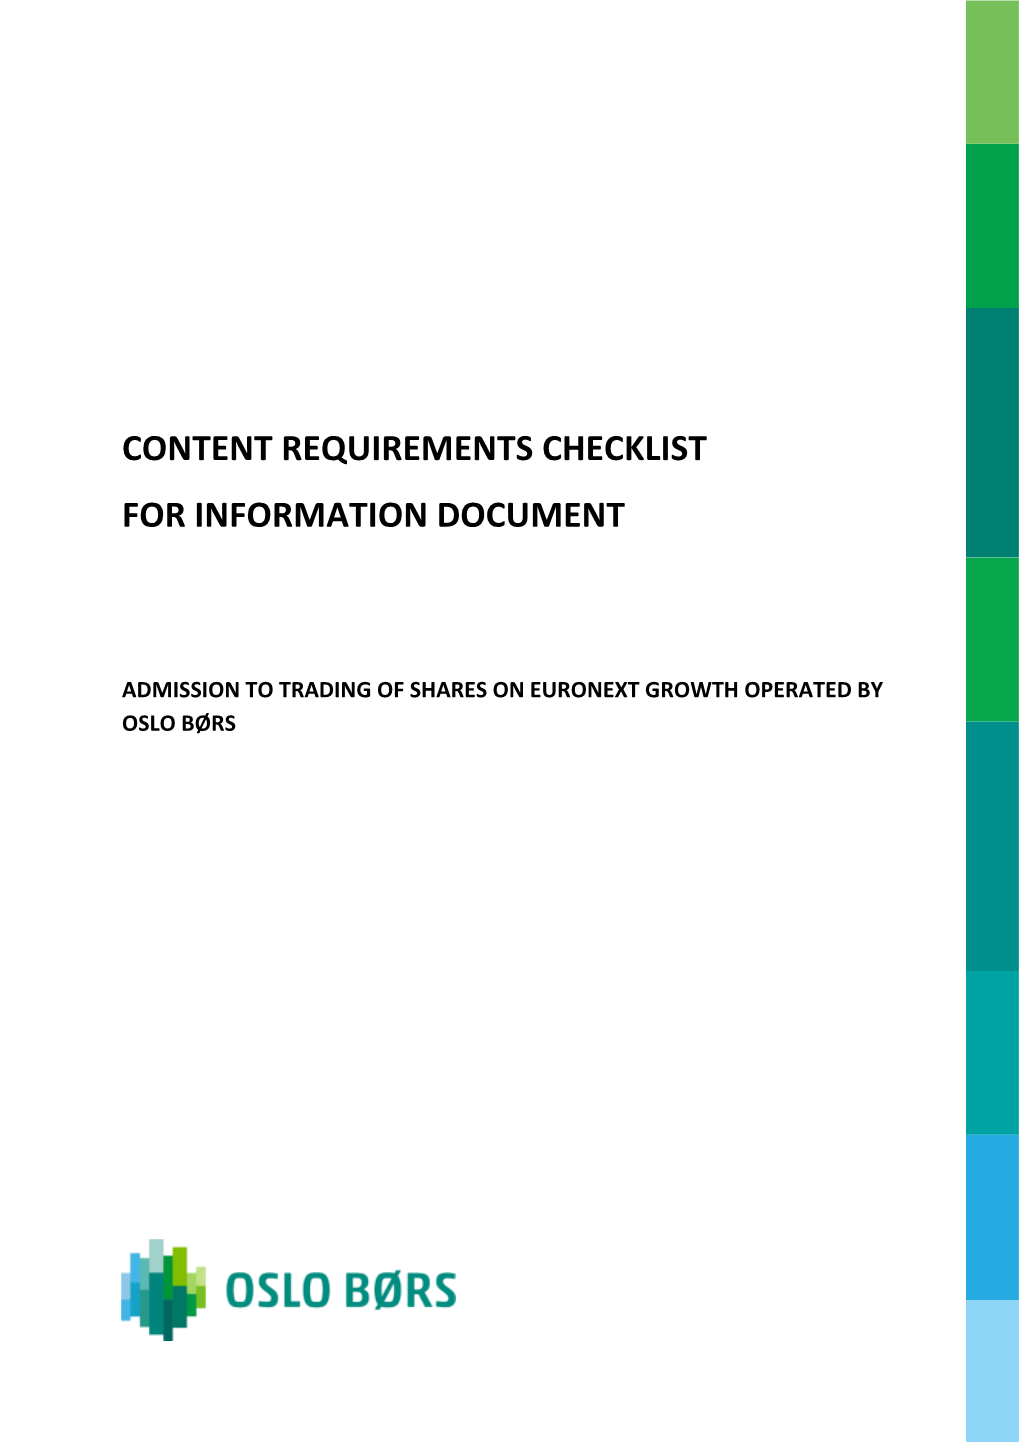 Content Requirements Checklist for Information Document